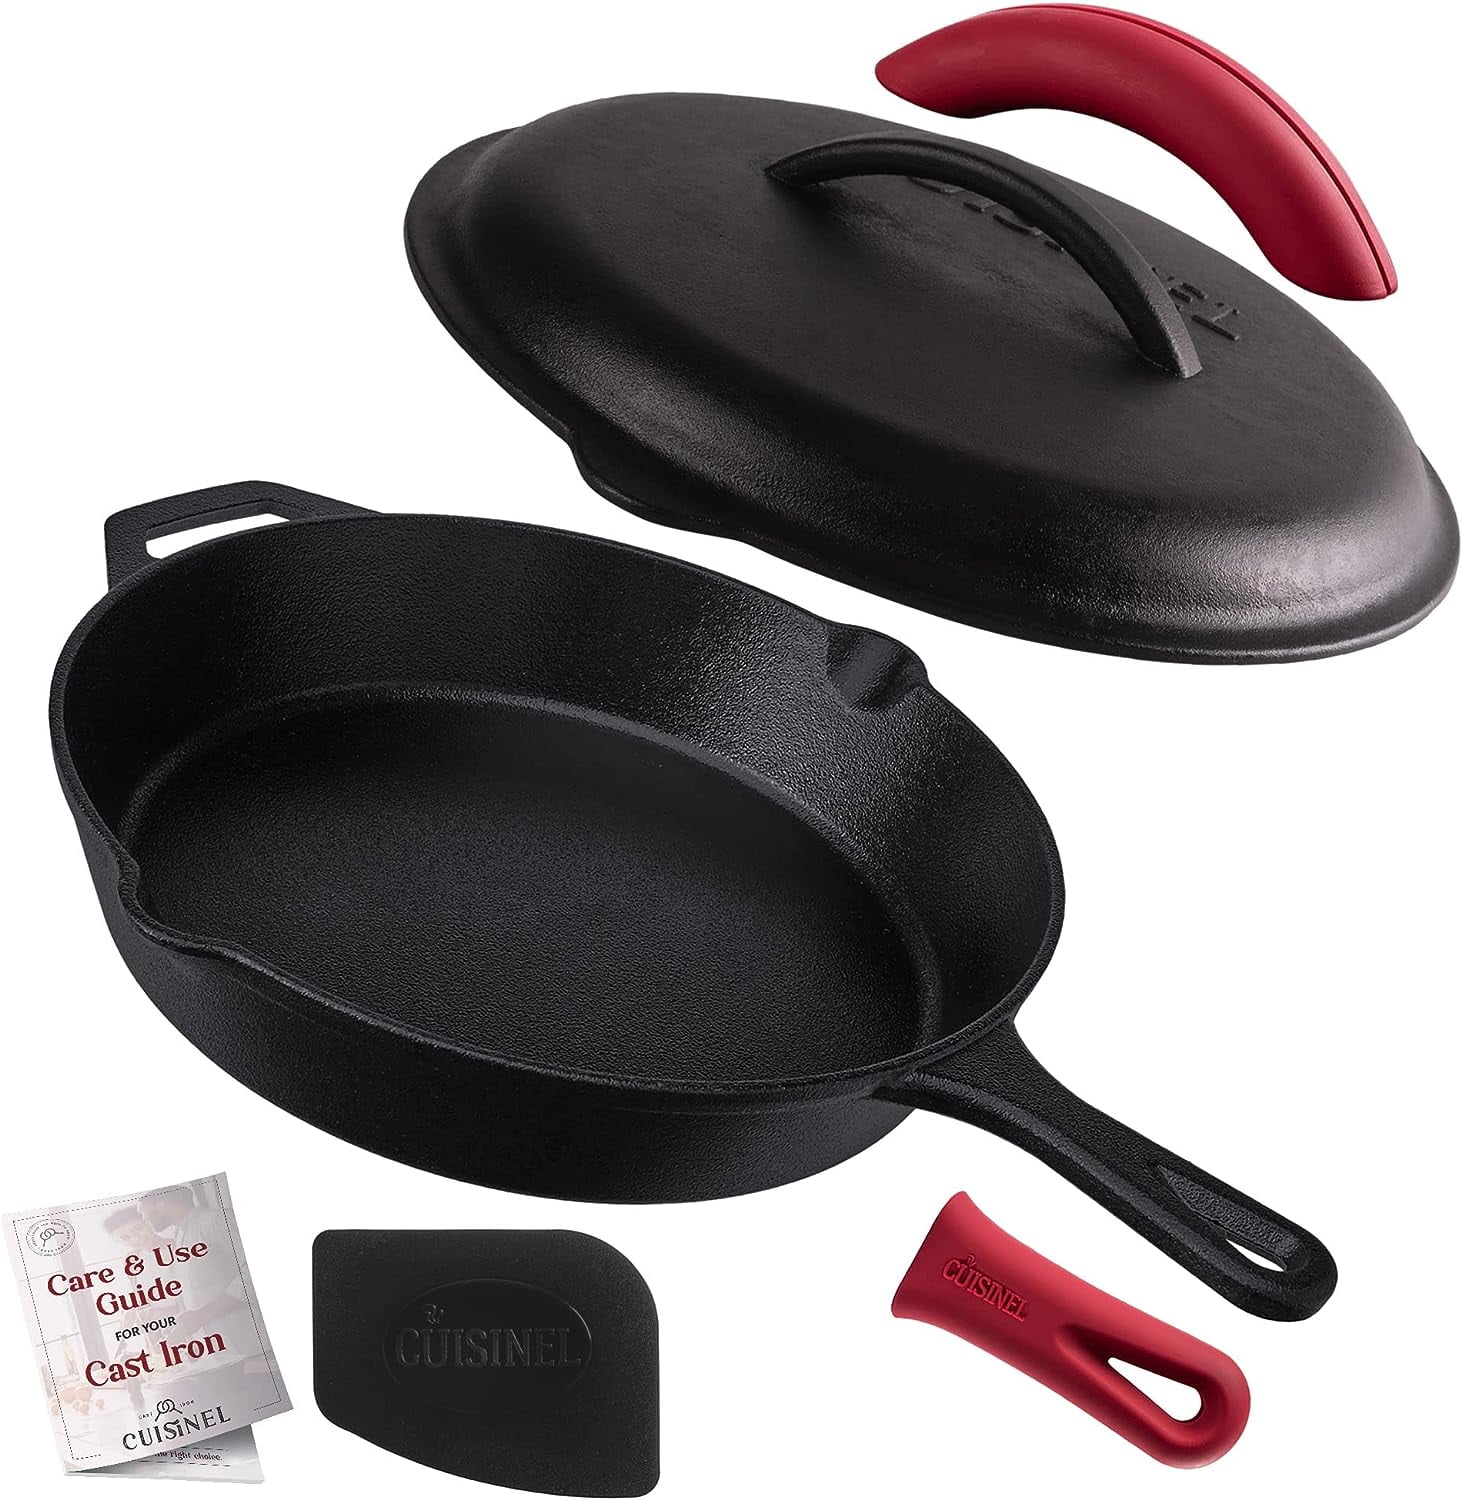 Cast Iron Skillet with Lid - 12-inch Pre-Seasoned Covered Frying Pan Set +  Silicone Handle & Lid Holders + Scraper/Cleaner - Indoor/Outdoor, Oven,  Stovetop, Camping Fire, Grill Safe Kitchen Cookware 